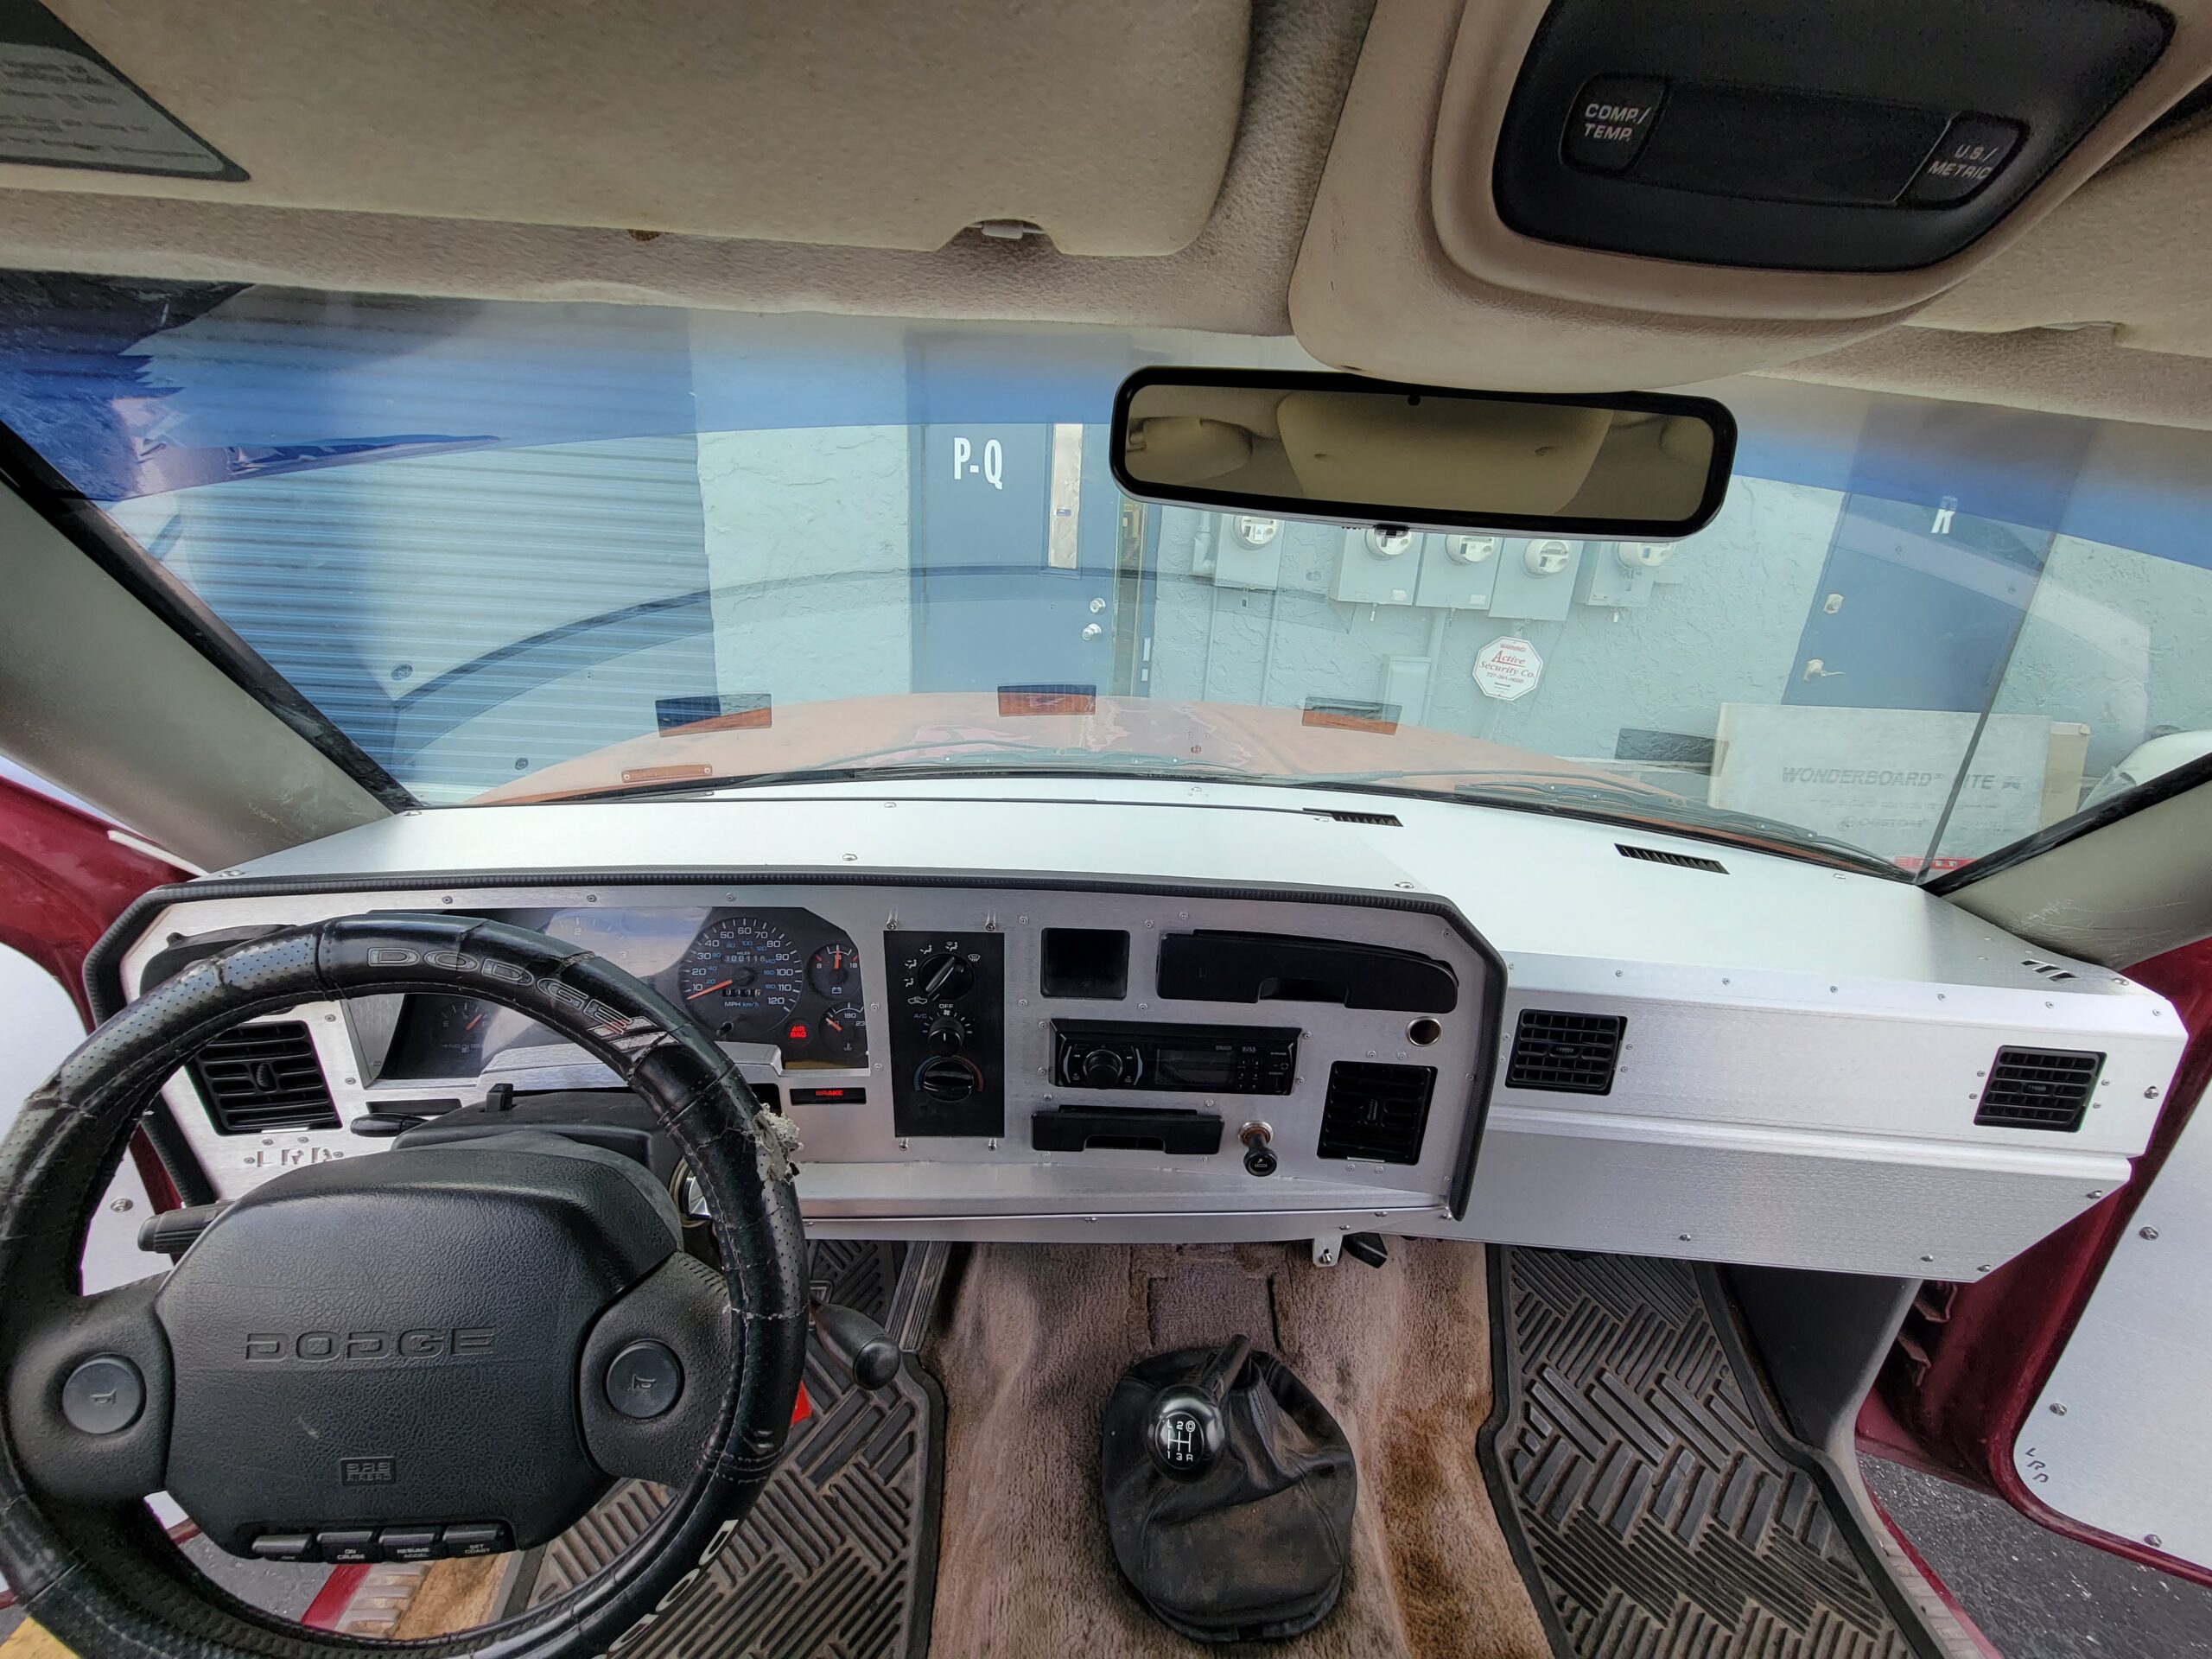 Dodge Ram Dashboards, Dashtop Covers and Dash Accessories